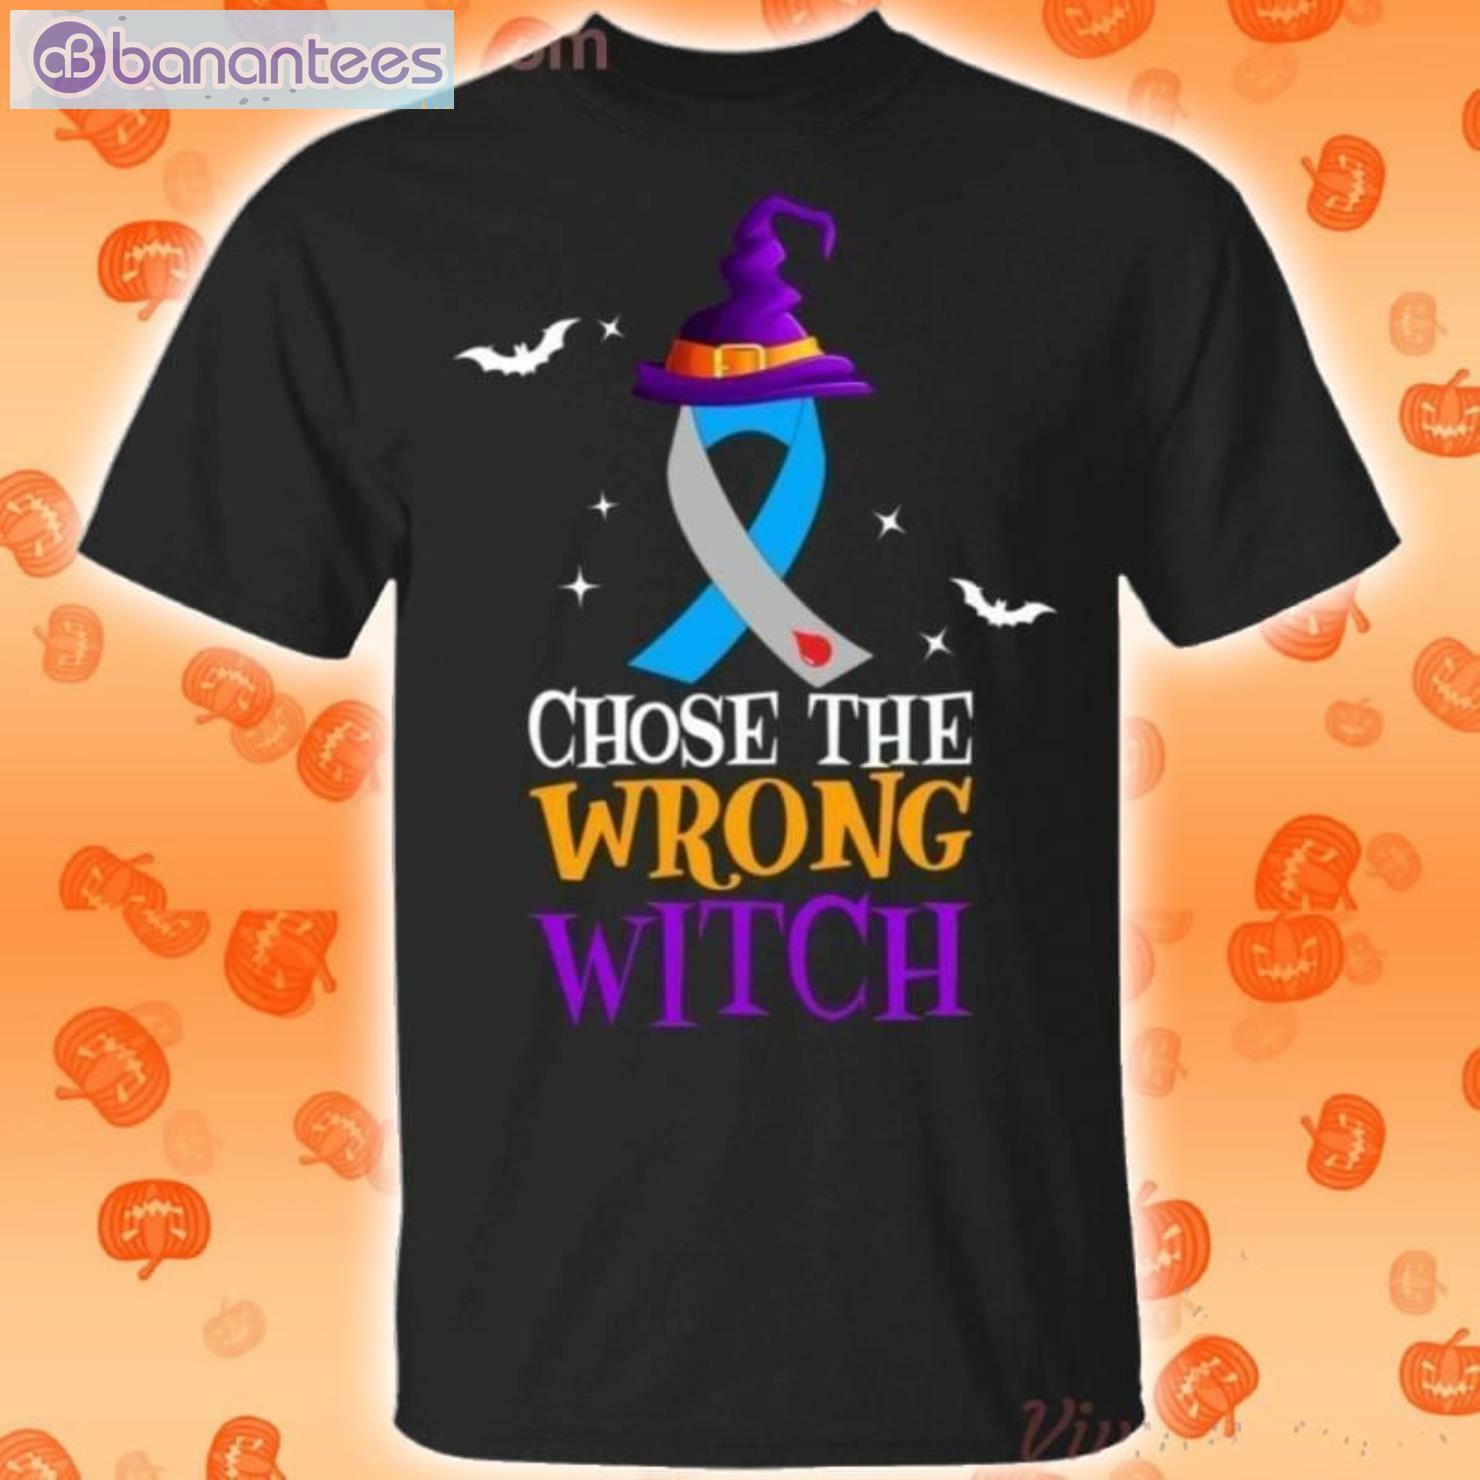 Diabetes Choose The Wrong Witch Halloween T-Shirt Product Photo 1 Product photo 1